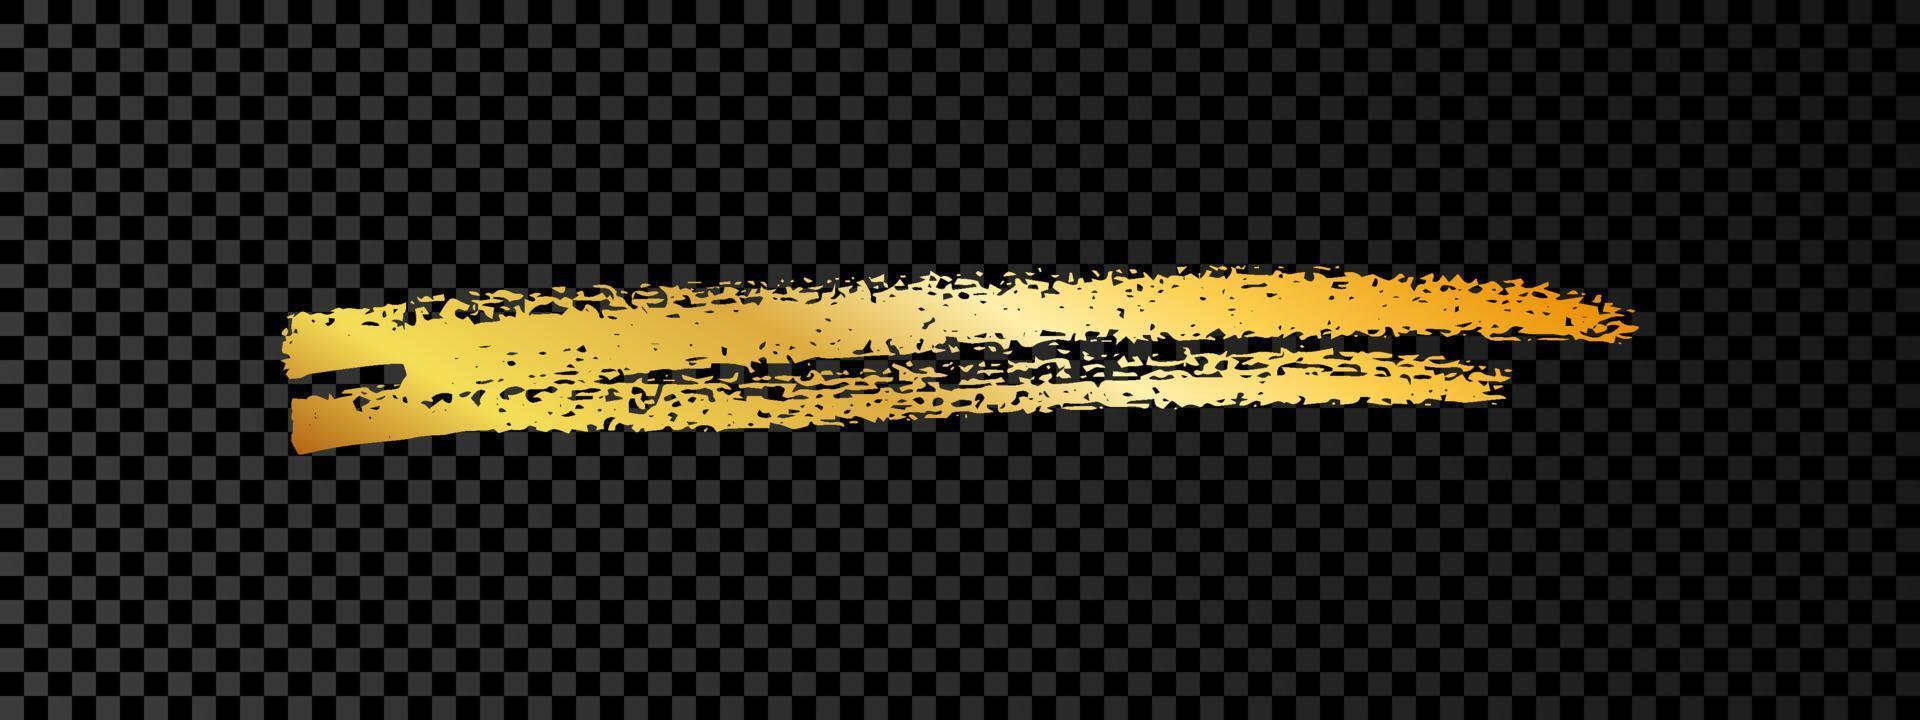 Gold paint brush smear stroke. Abstract gold glittering sketch scribble smear vector